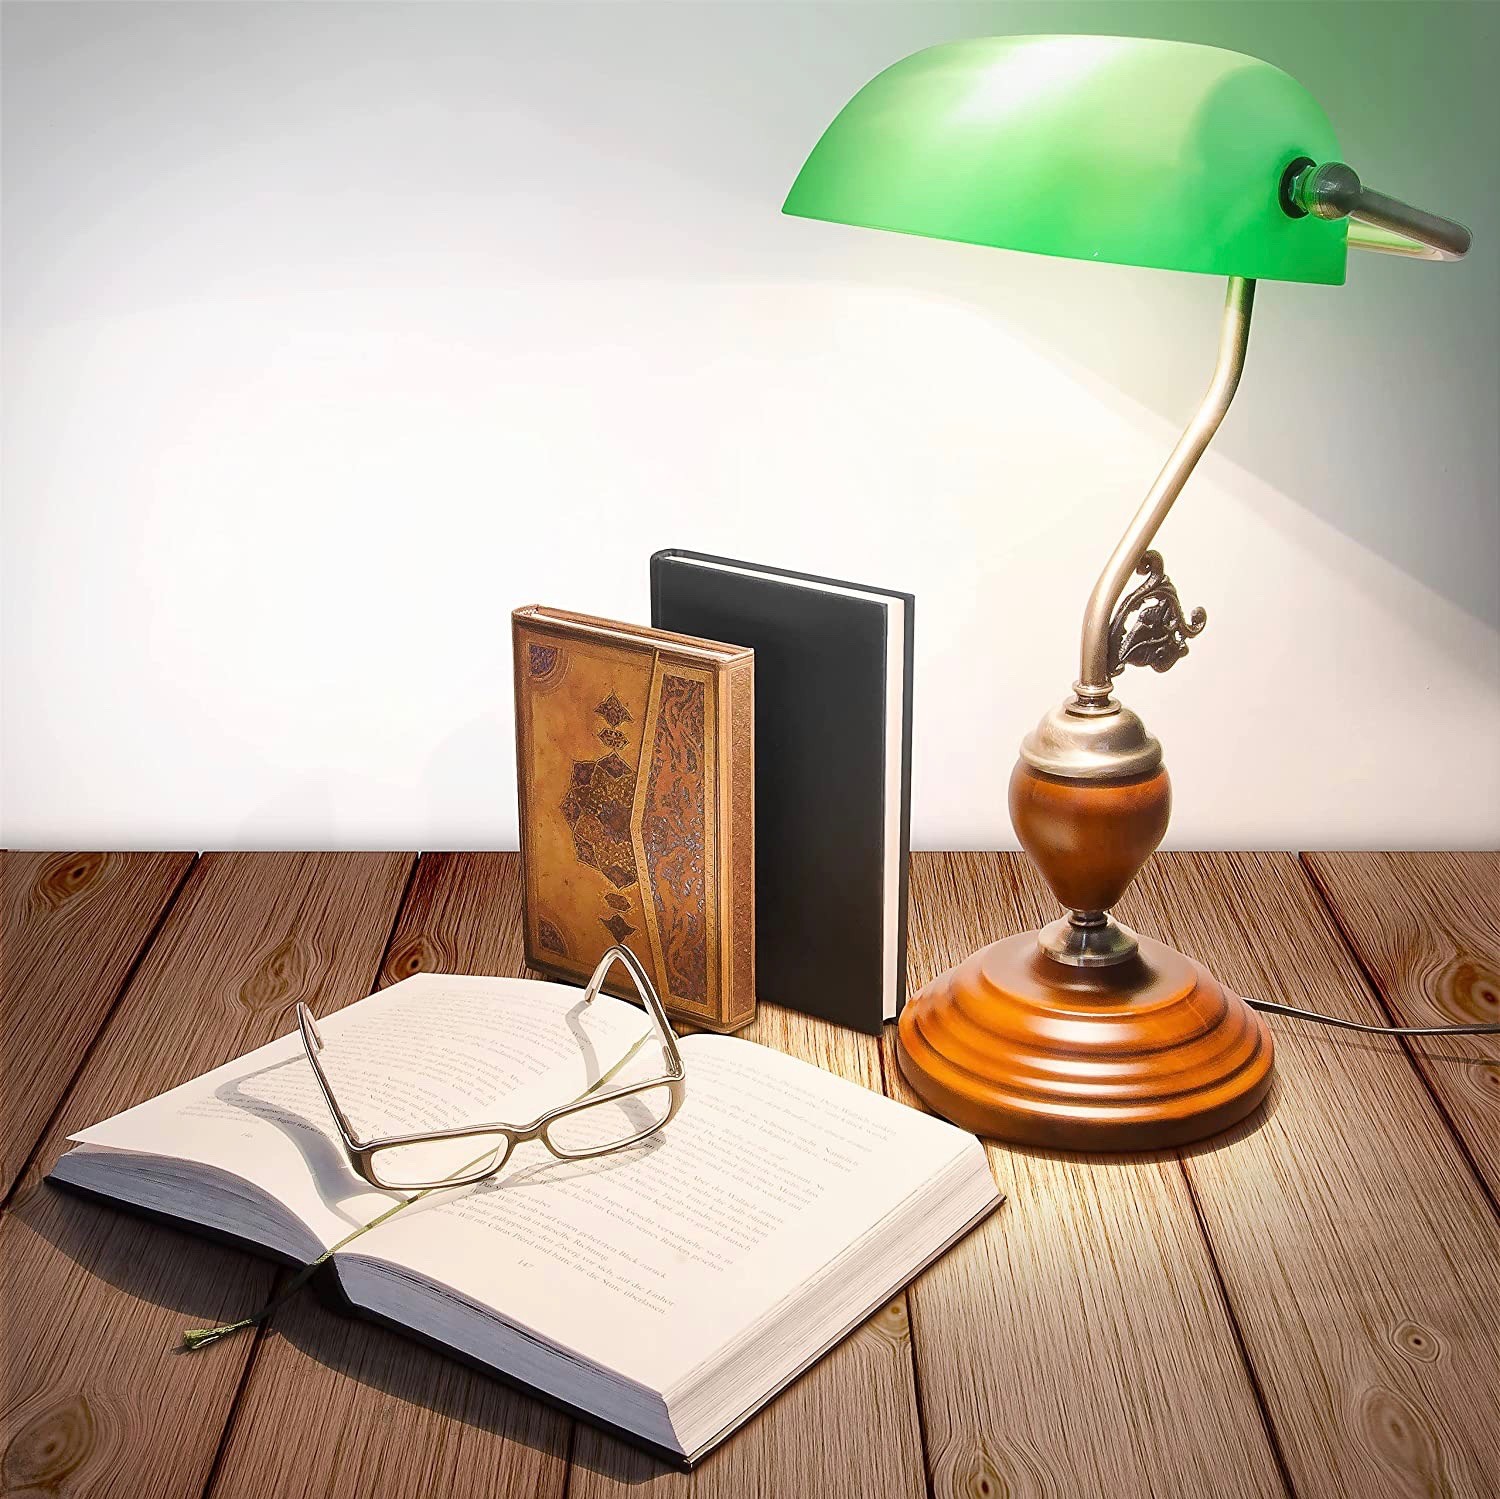 73,95 € Free Shipping | Desk lamp 40W 43×16 cm. Wood and glass. Green Color